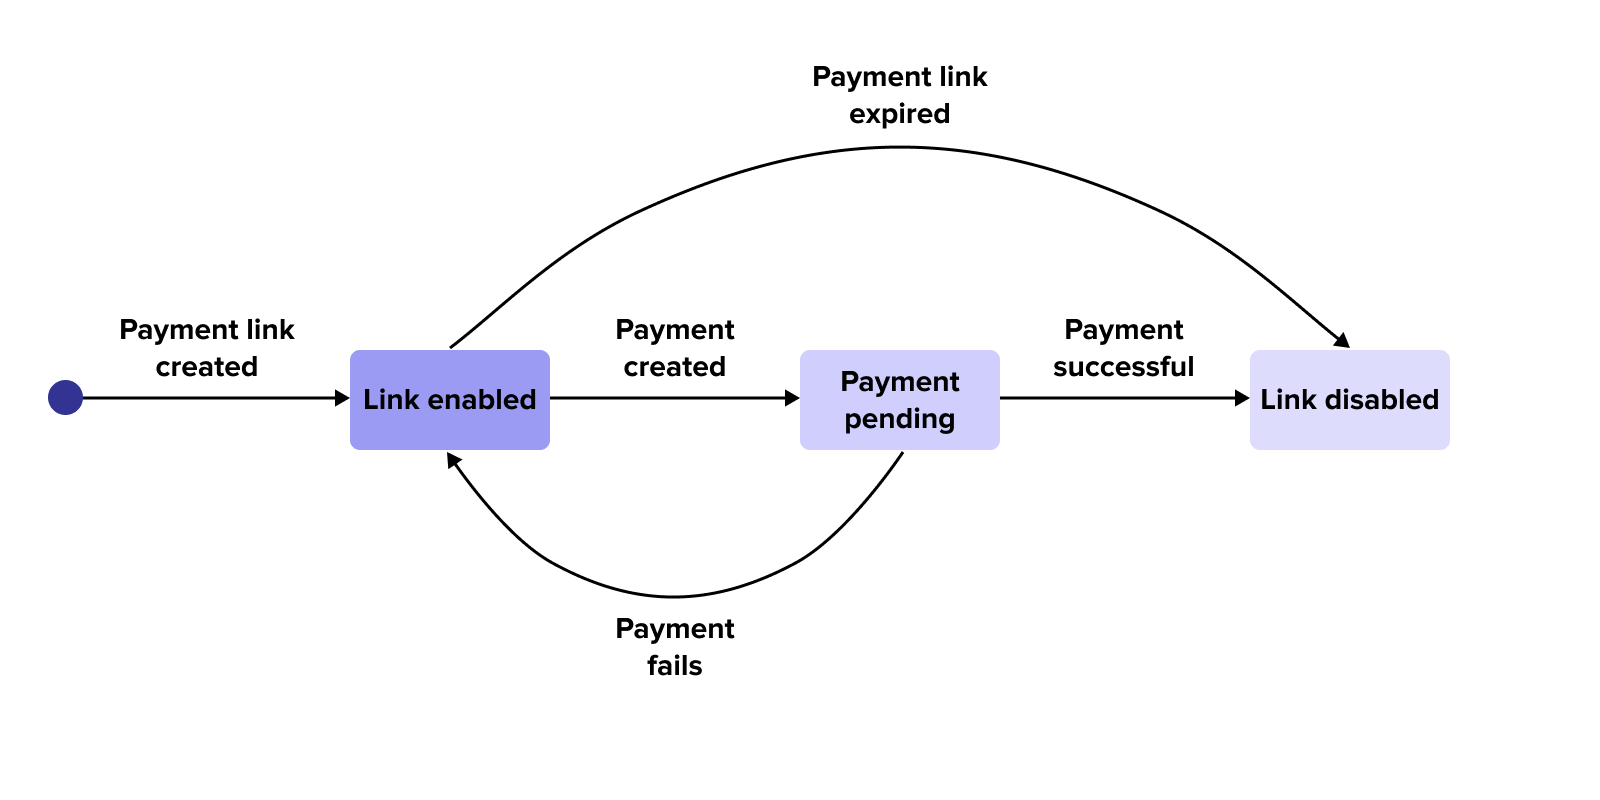 A flow diagram explaining the lifecycle of a payment link.